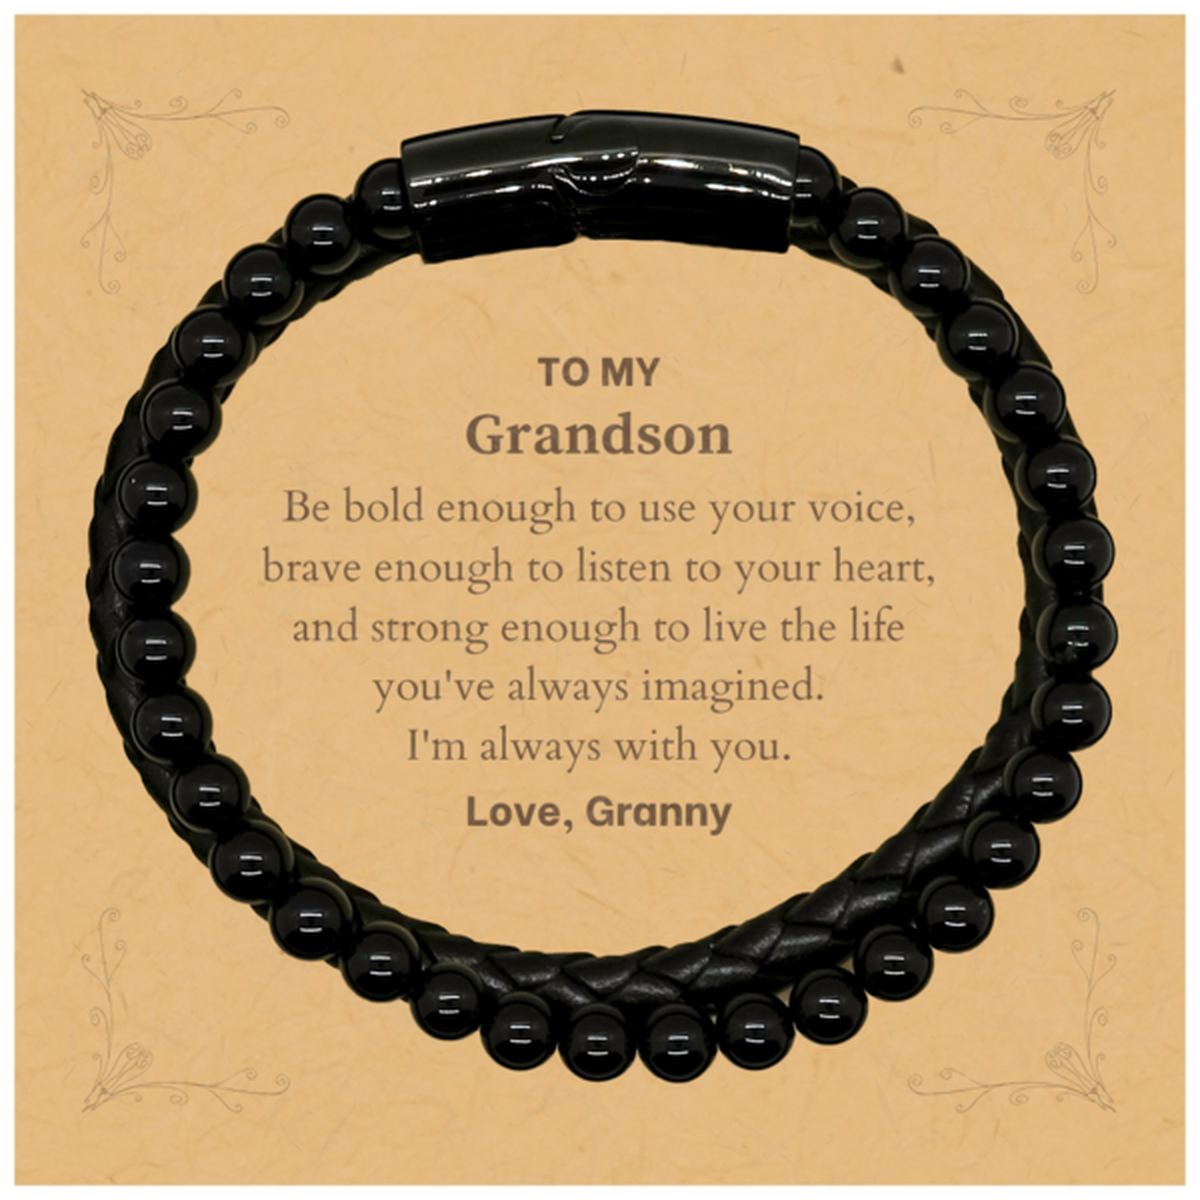 Keepsake Grandson Stone Leather Bracelets Gift Idea Graduation Christmas Birthday Grandson from Granny, Grandson Be bold enough to use your voice, brave enough to listen to your heart. Love, Granny